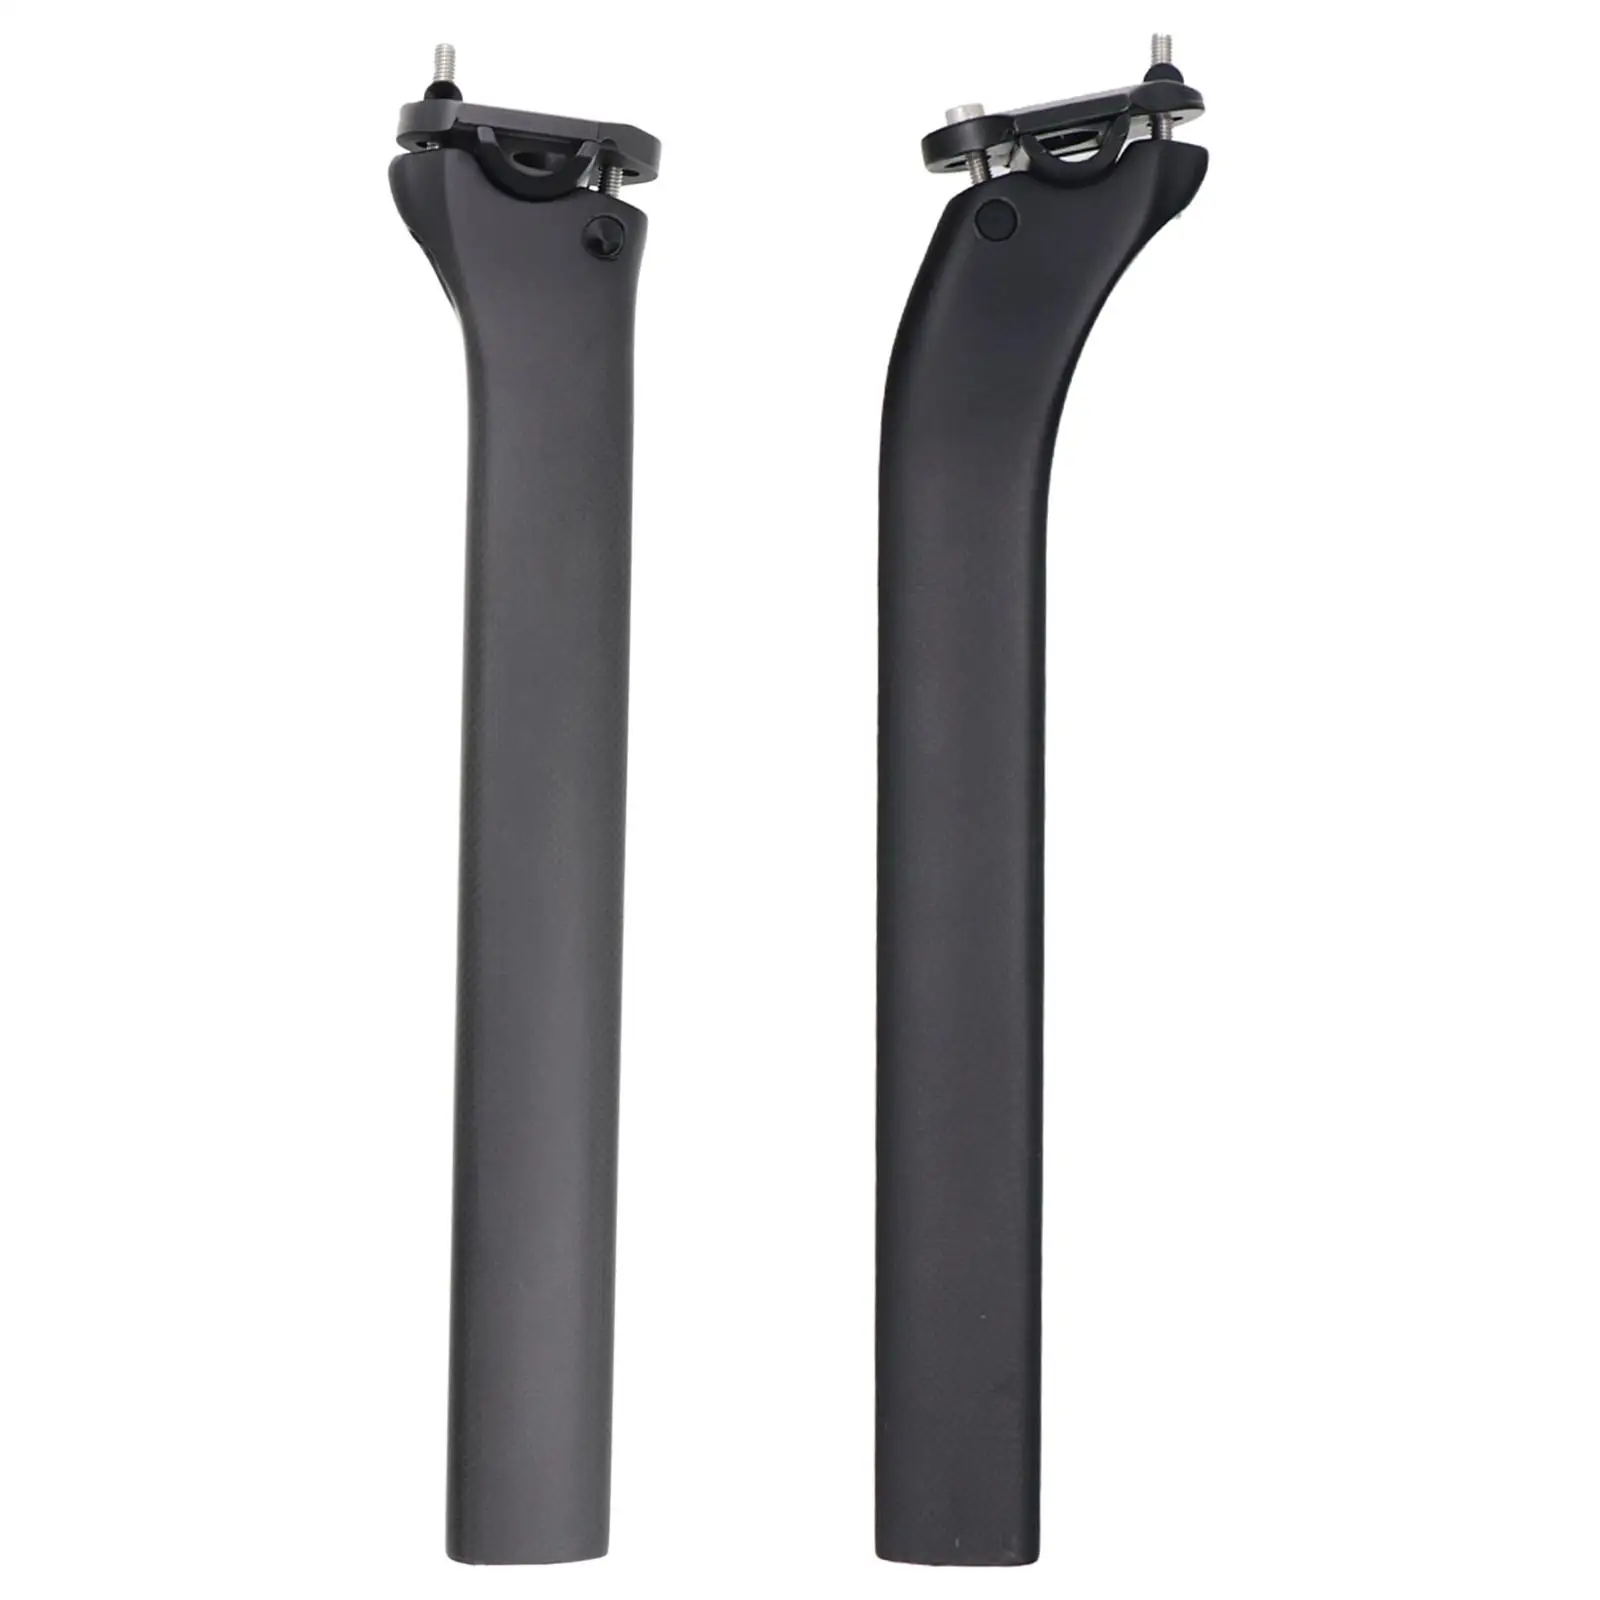 Carbon Road Bike Seat Post Ultralight 340mm Cycling Seat Tube Bicycle Seatpost for F8/F10/F12 Frame Saddle Post Replacement